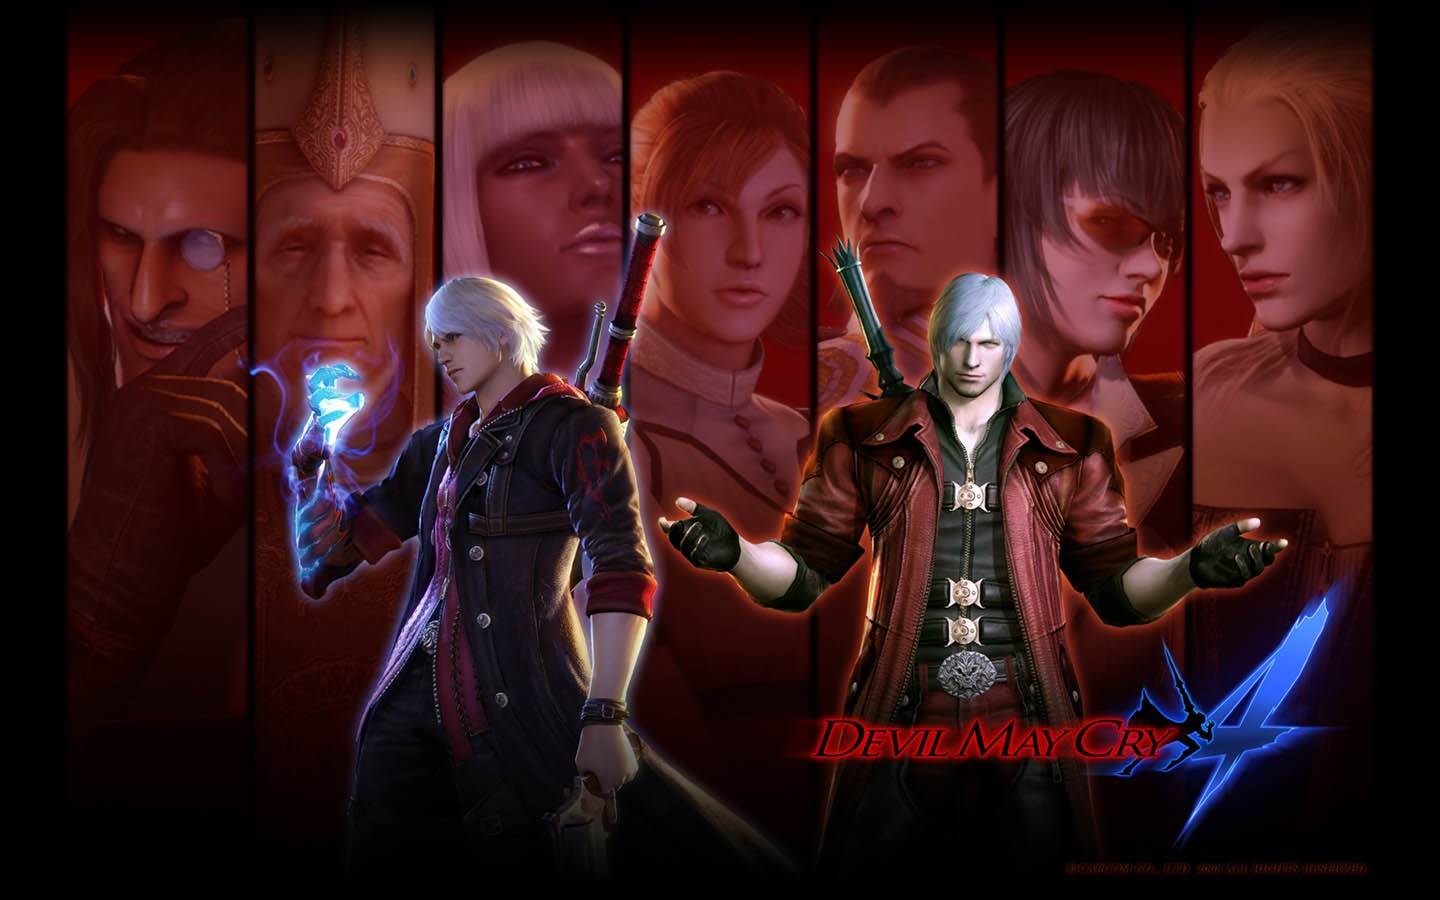 nero, Devil May Cry, Dante, Devil May Cry 4, Anime Wallpaper